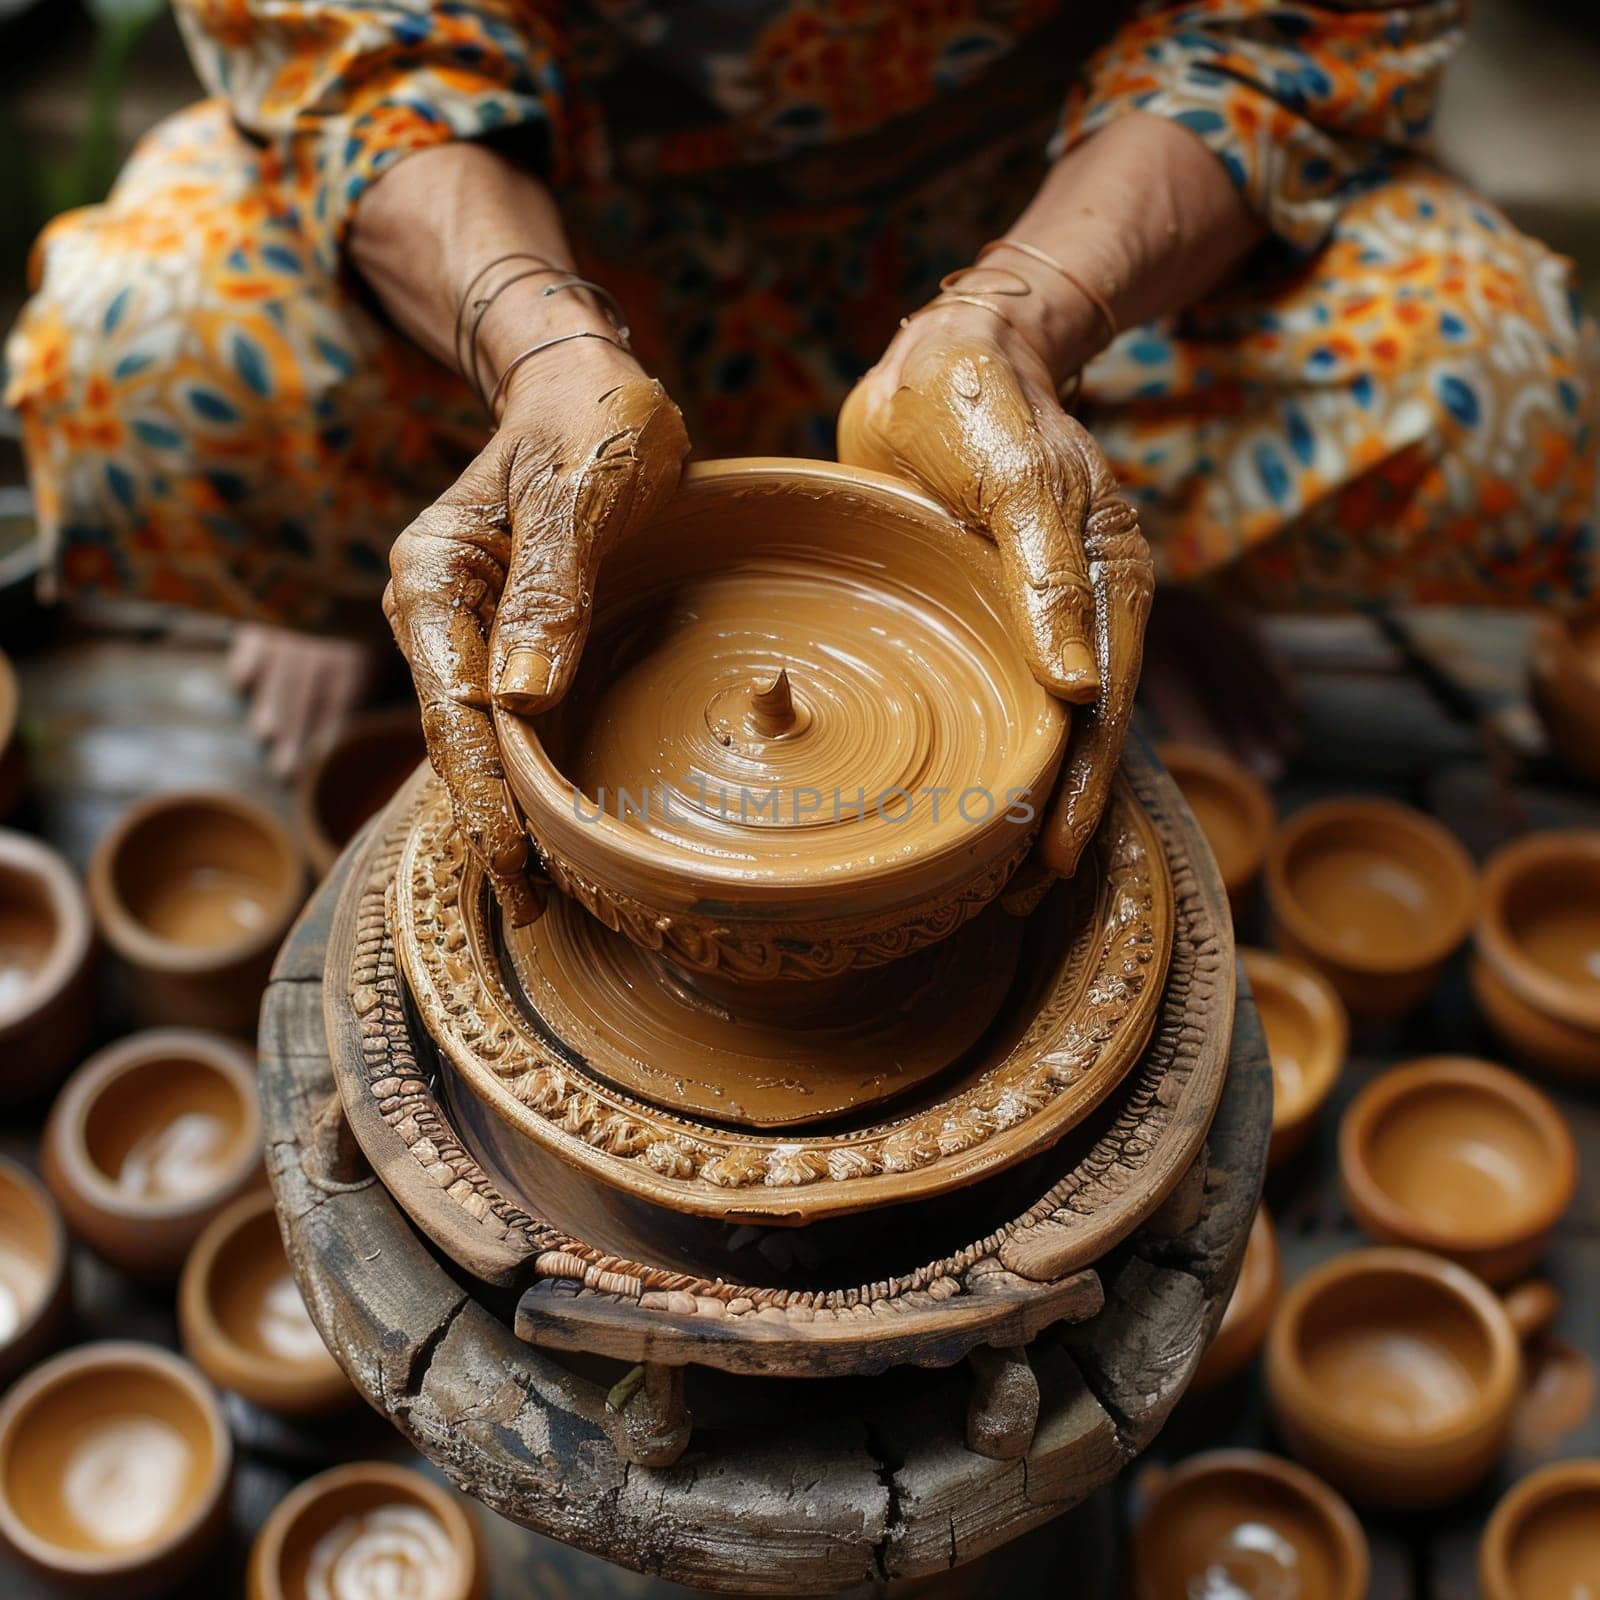 A skilled woman is delicately shaping a pot out of clay, molding and sculpting with precision and care.